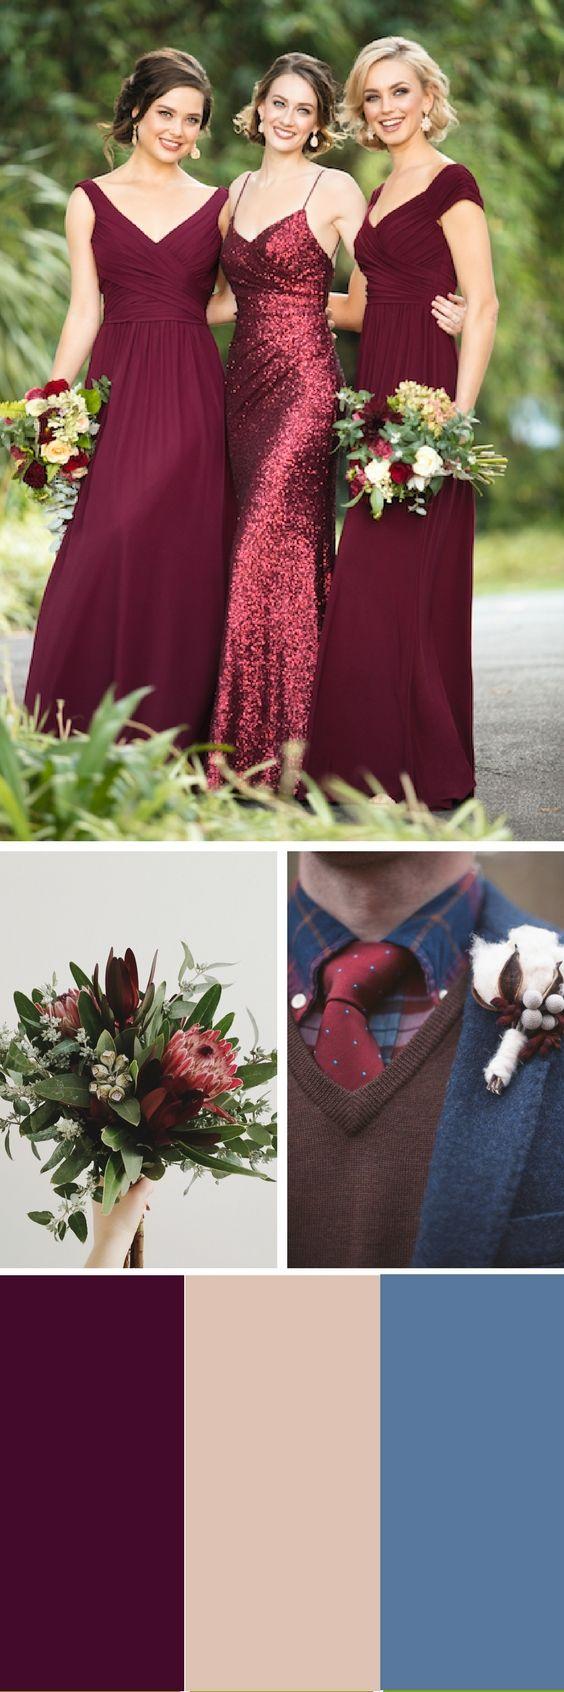 Mariage - Trends We Love: Mixed Berry Bridal Parties